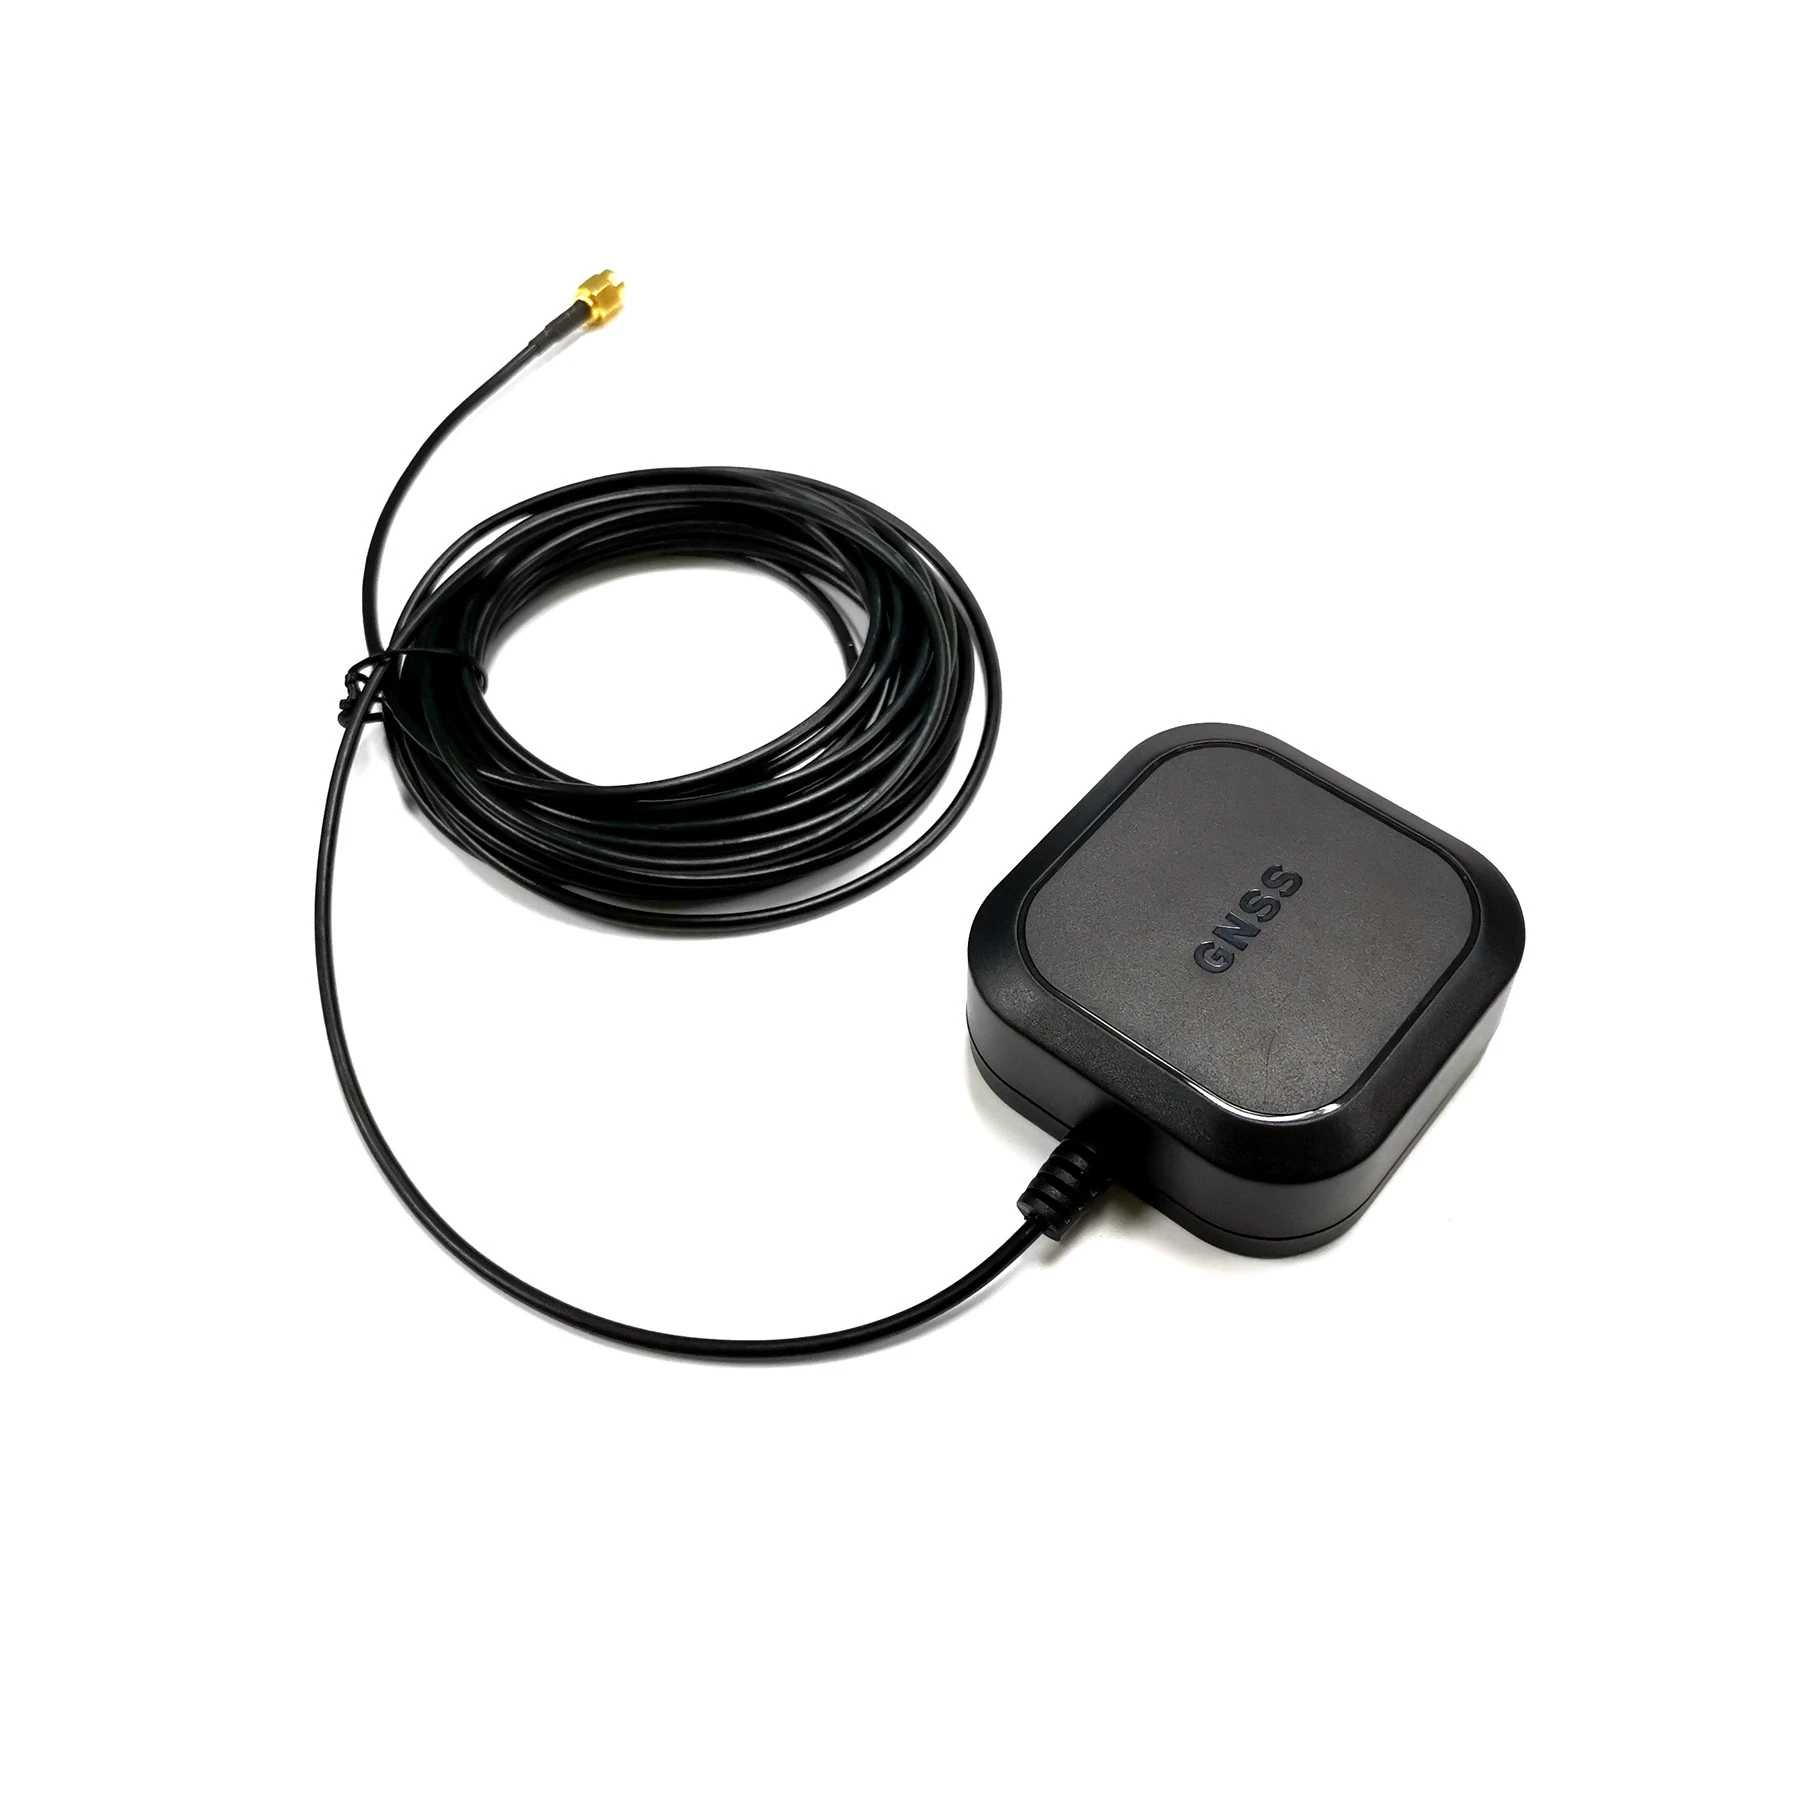 SMA-J cable 5meter NEW GNSS L1,L2, gnss antenna RTK GPS Antenna GNSS GPS  GLONASS GALILEO antenna for ZED-F9P gnss module - AliExpress Automobiles   Motorcycles